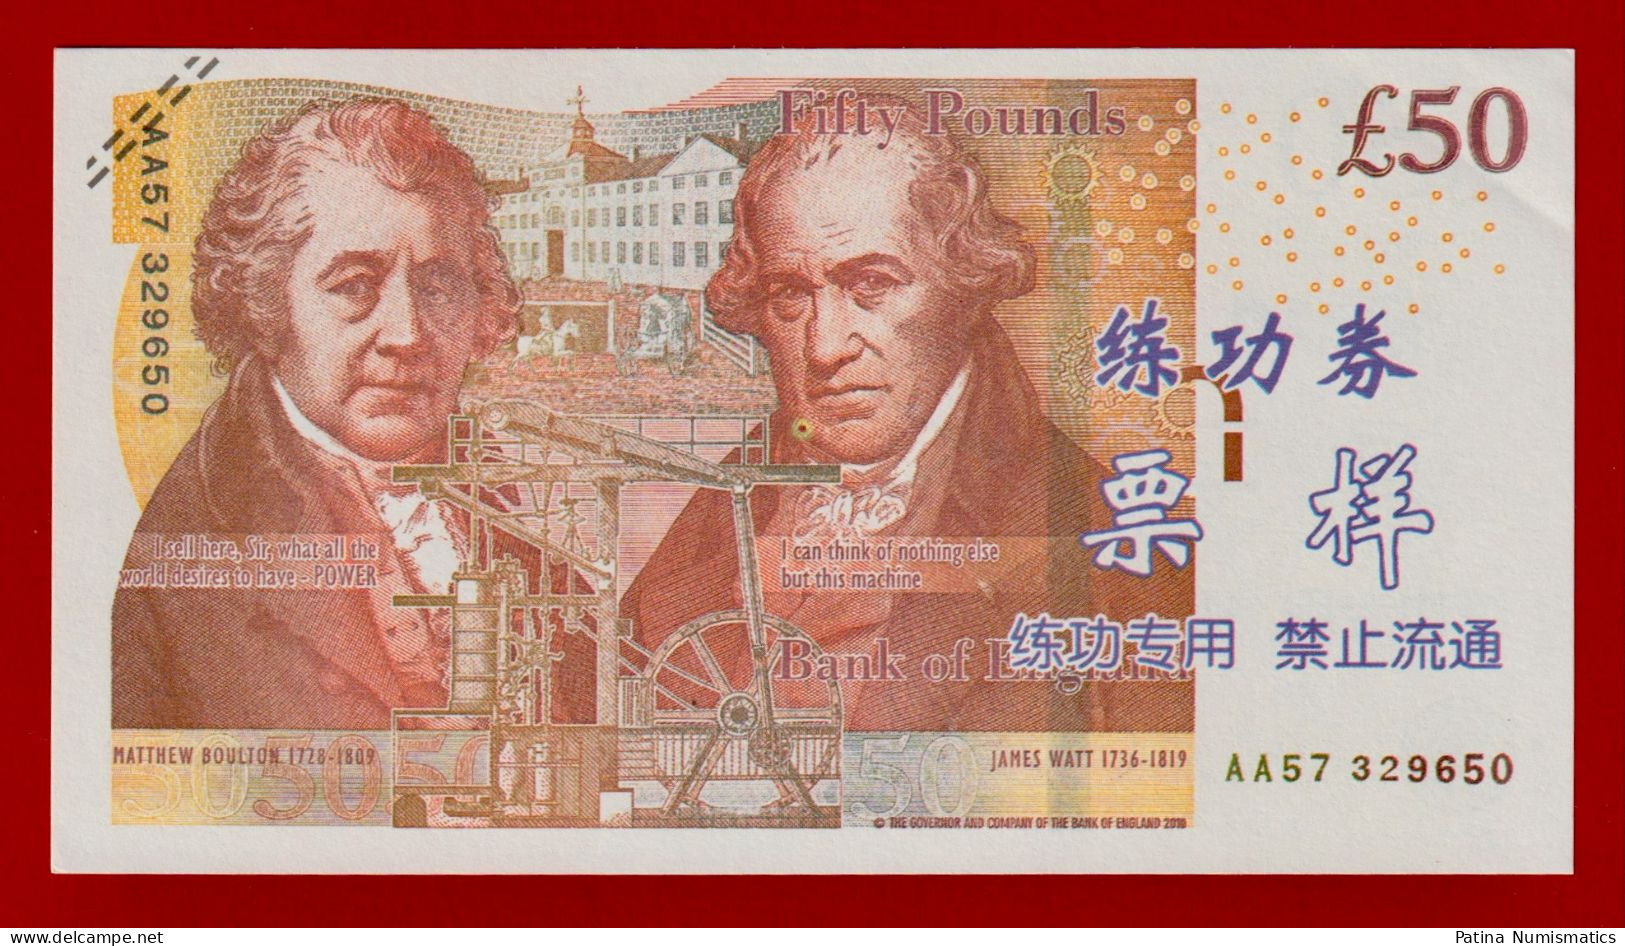 REPLIKA GREAT BRITAIN 50 Pounds  CHINESE TRAINING NOTE REPRODUKTION - Andere - Europa